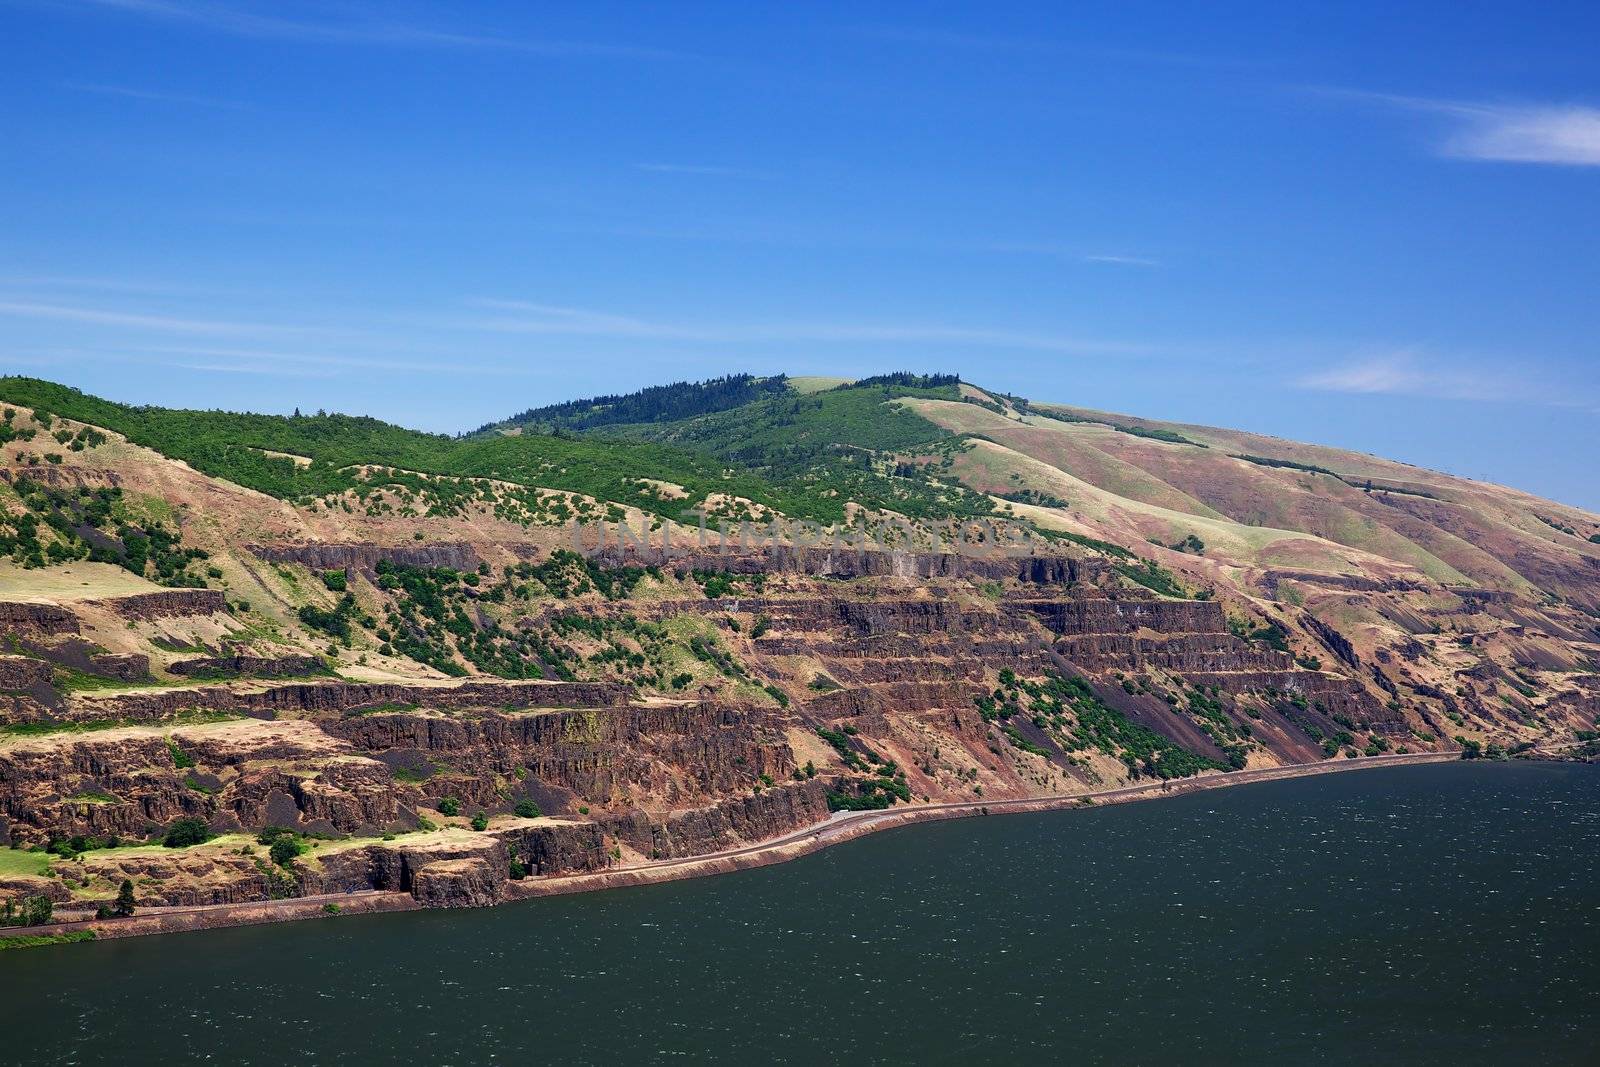 Eroded Ridges of the Columbia River Gorge on a blue sky day